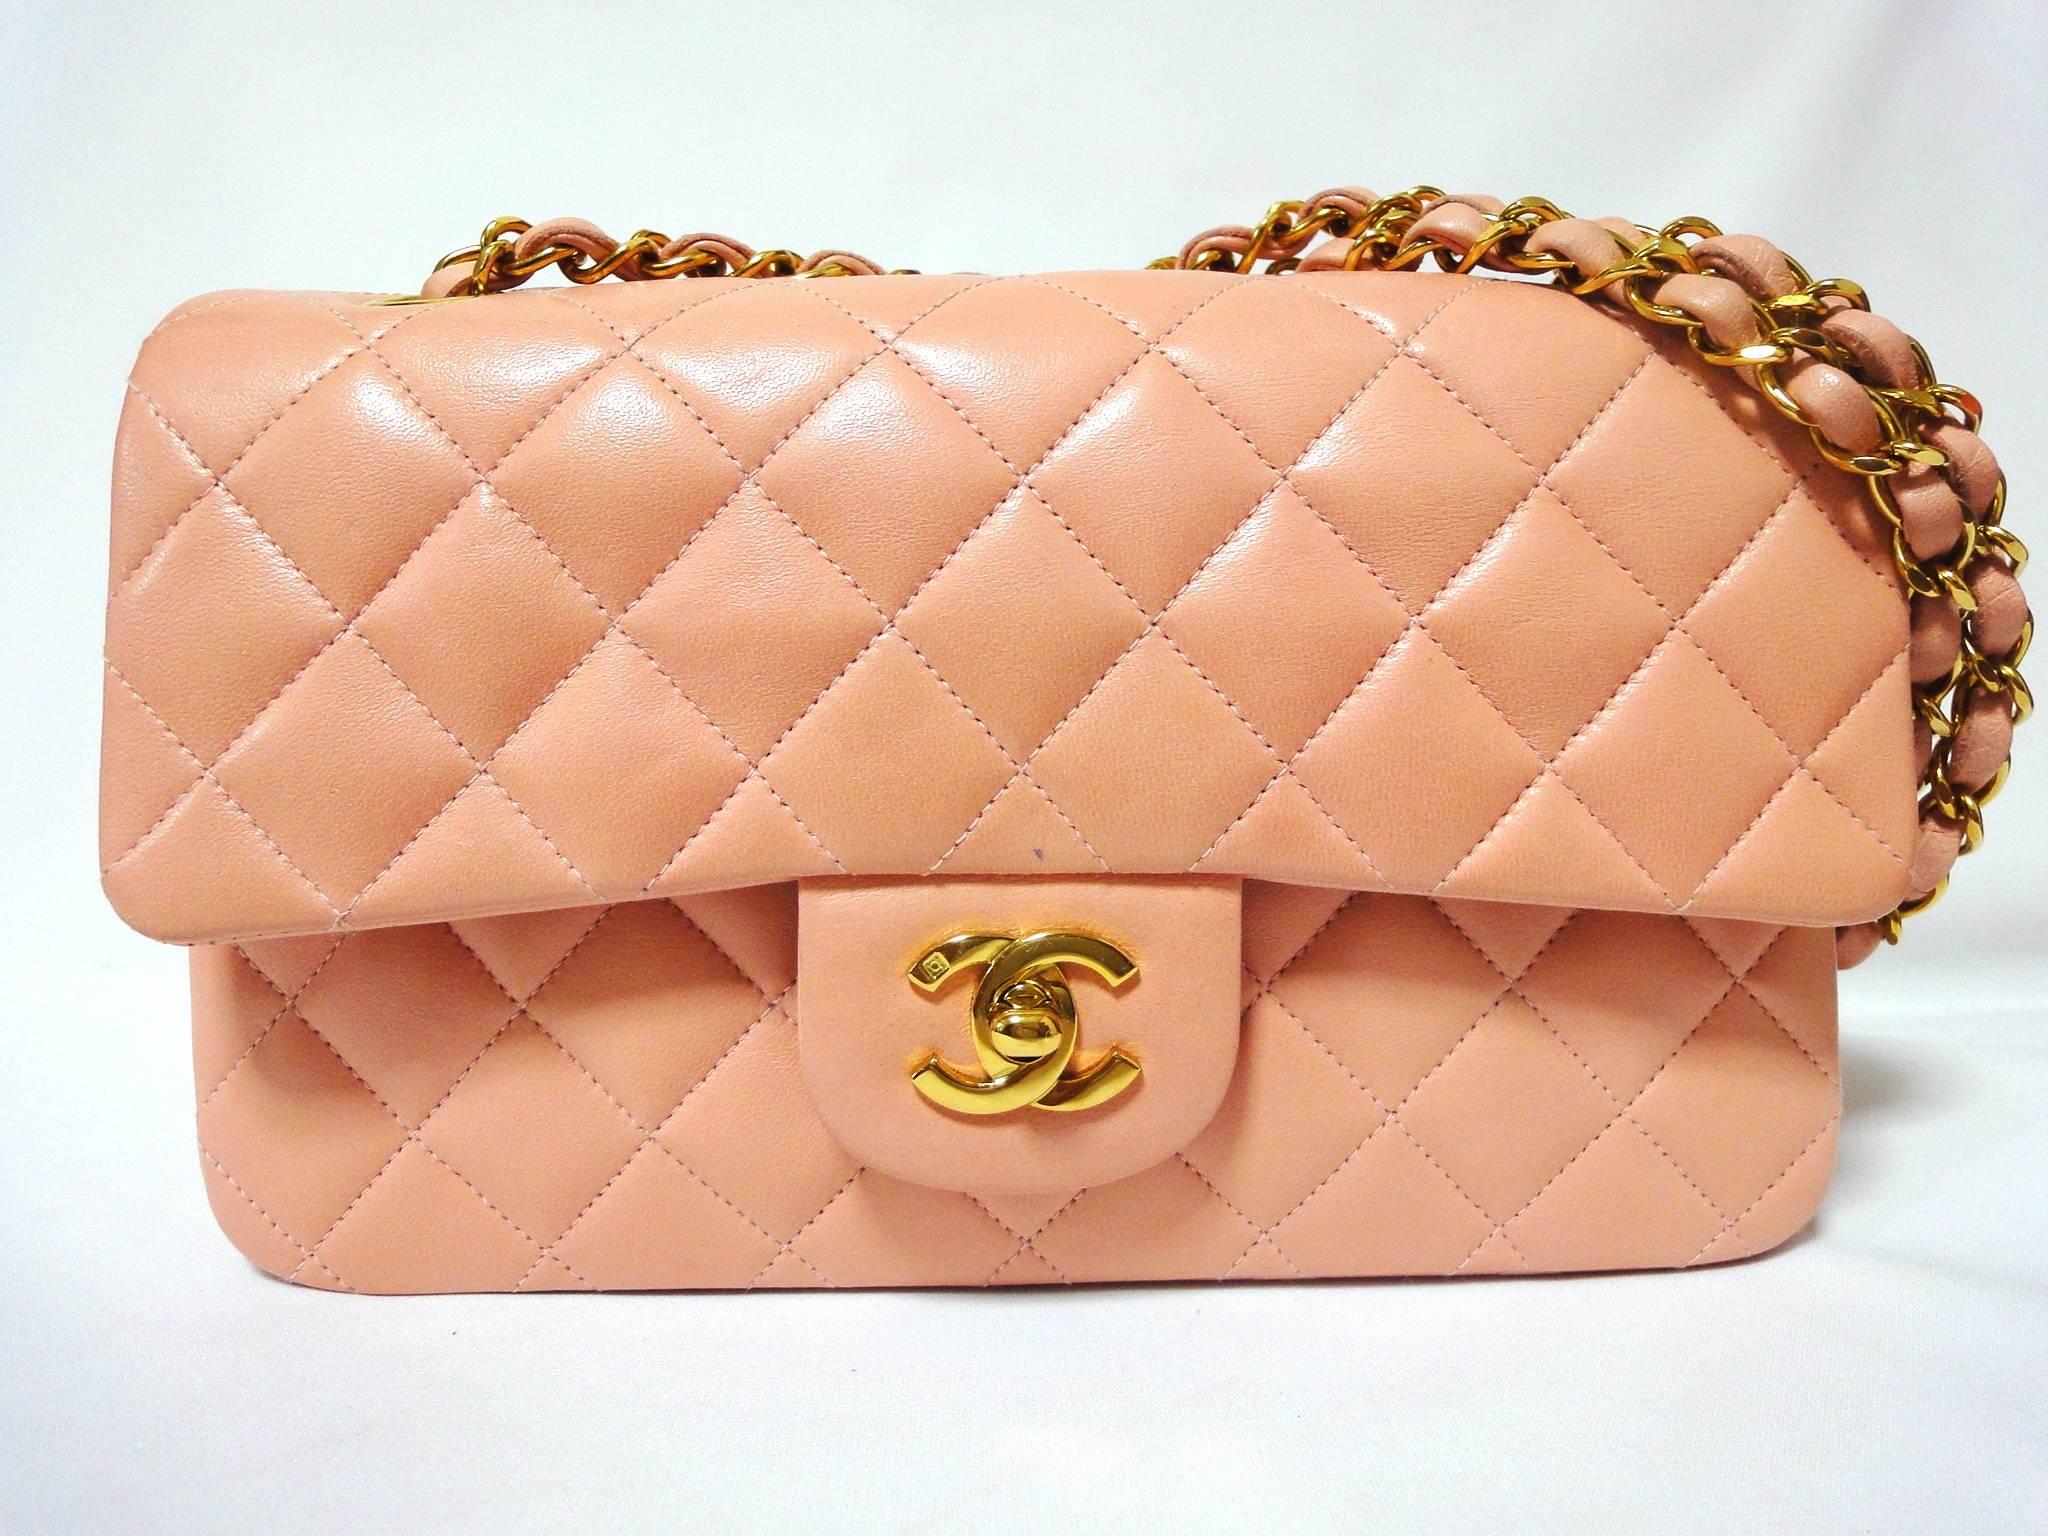 MINT. Vintage CHANEL pink lambskin classic 2.55 double flap shoulder purse with golden chain straps. Rare color. 

Introducing another rare vintage piece, a classic lamb leather 2.55 double flap purse with gold chain strap from Chanel in the 90's.